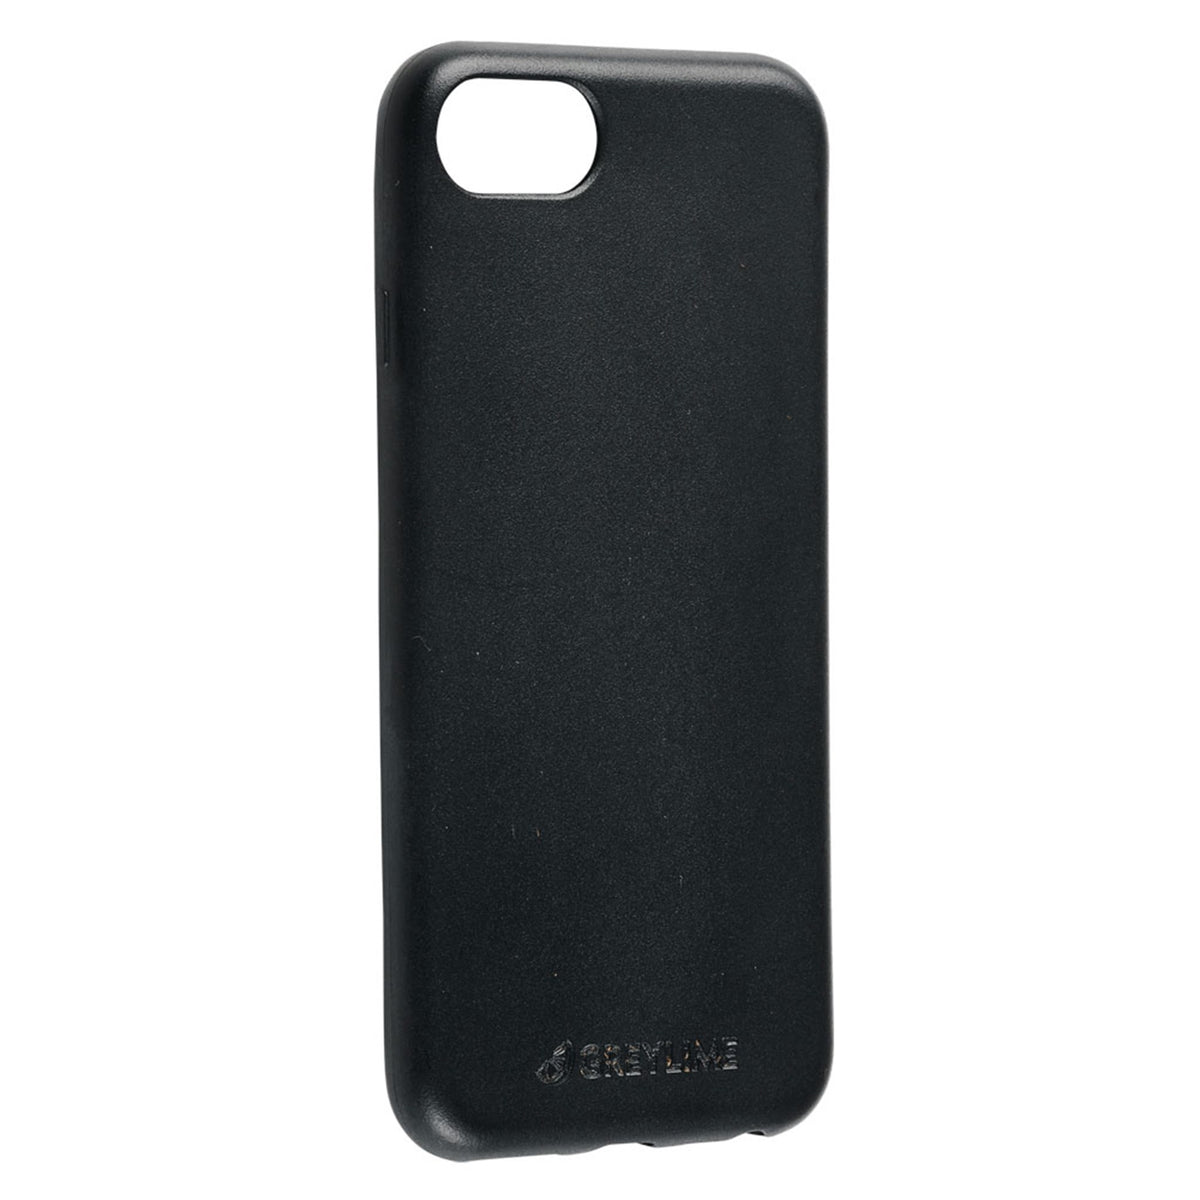 GreyLime-iPhone-6-7-8-Plus-biodegradable-cover-Black-COIP678P01-V1.jpg